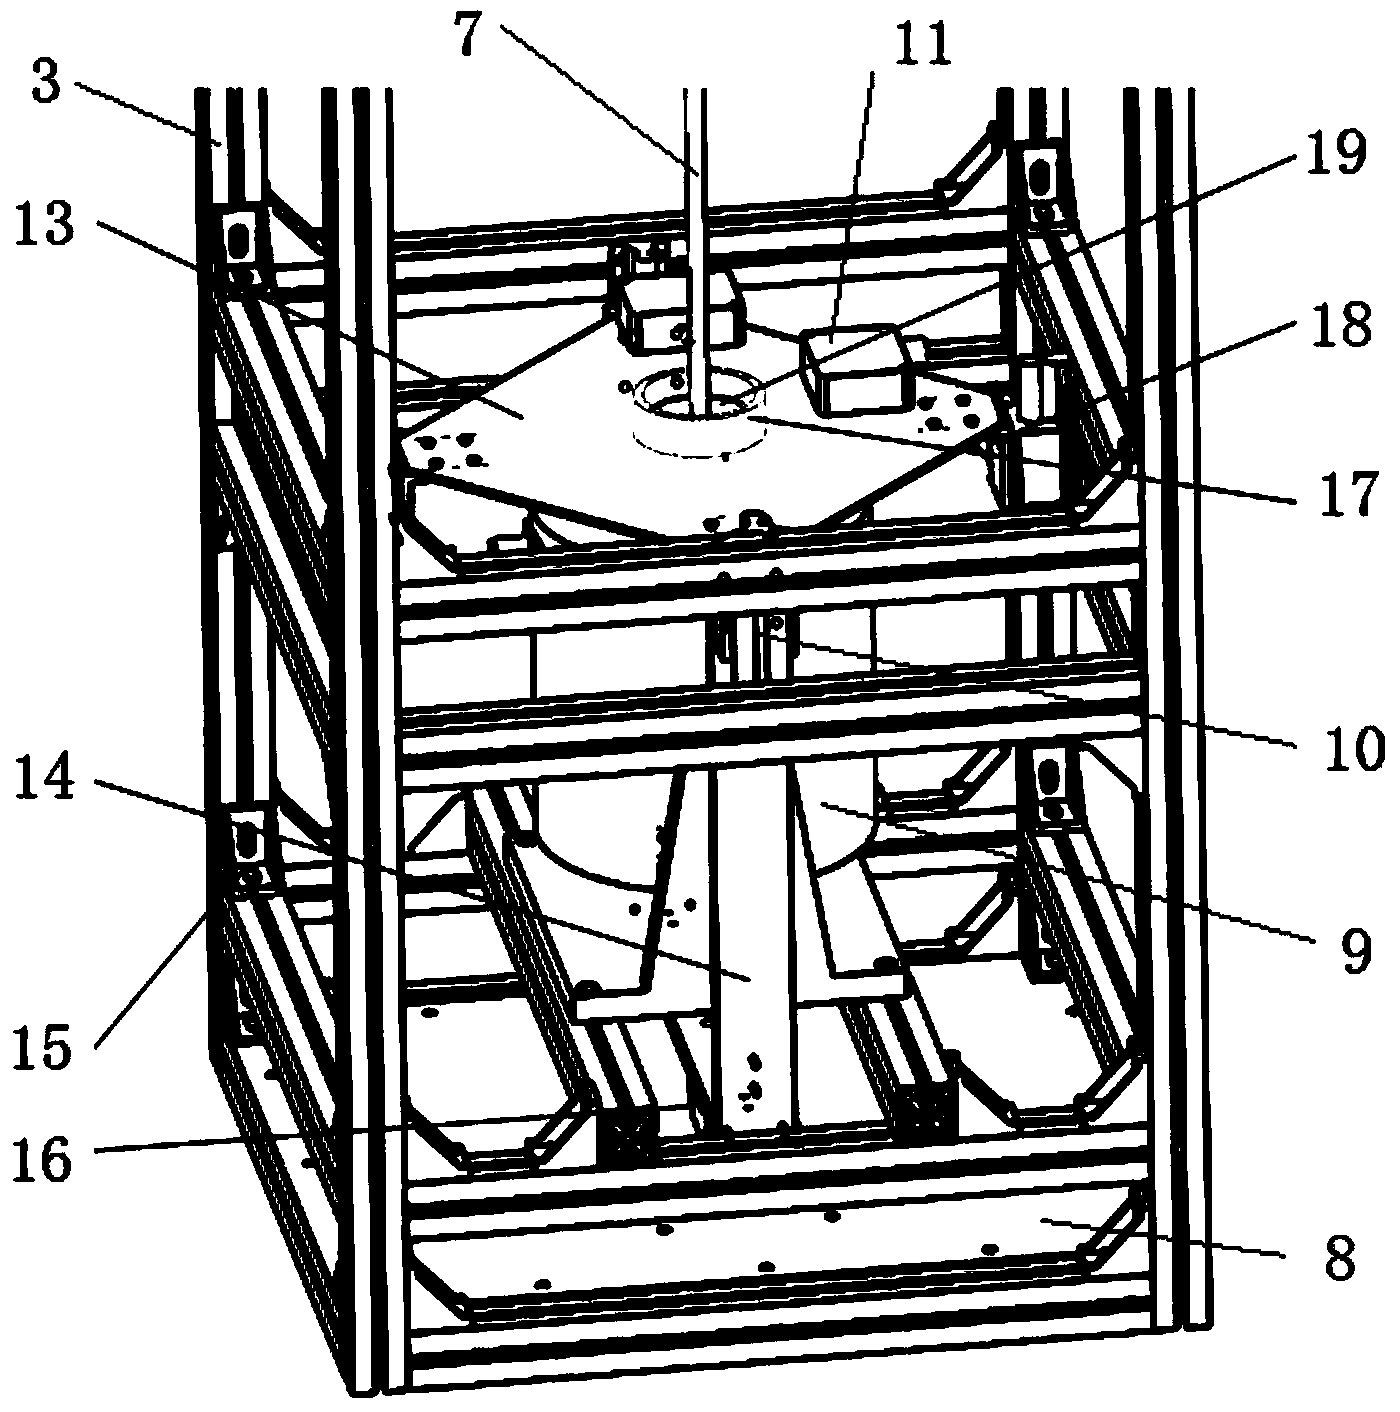 Experimental device for researching drill column dynamic characteristic